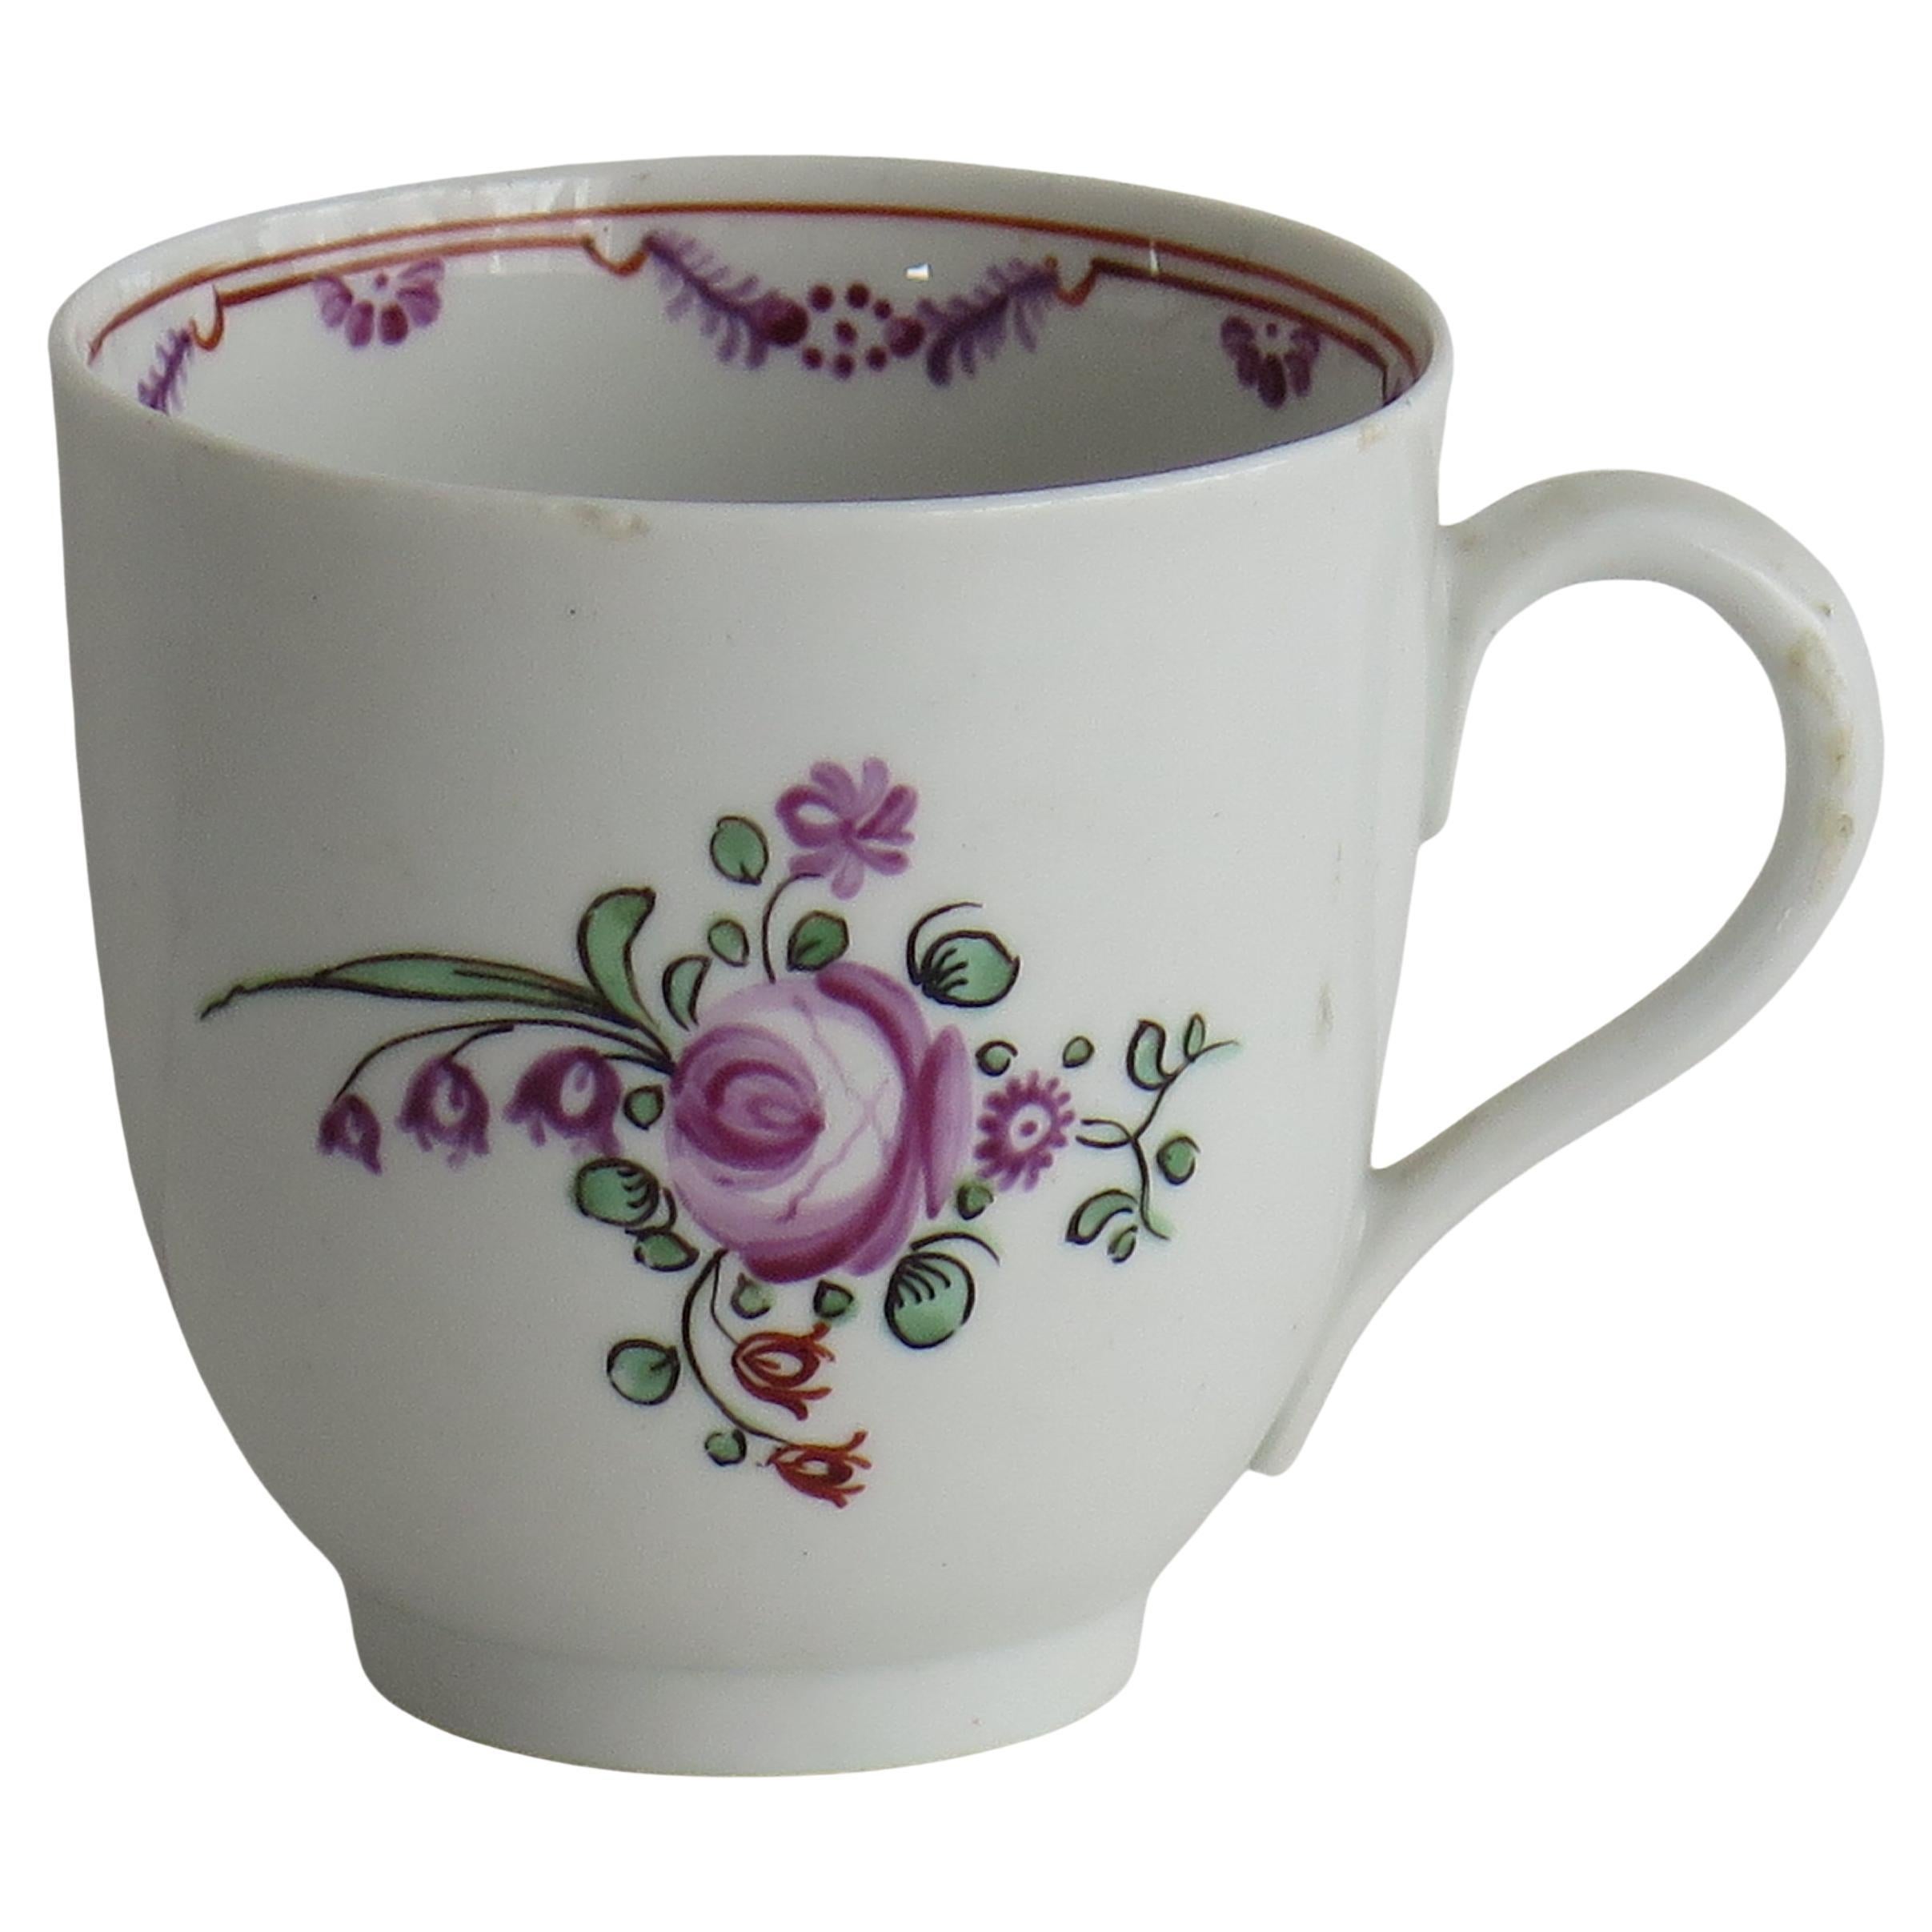 18th Century Newhall Porcelain Coffee Cup Pattern 139, Circa 1790